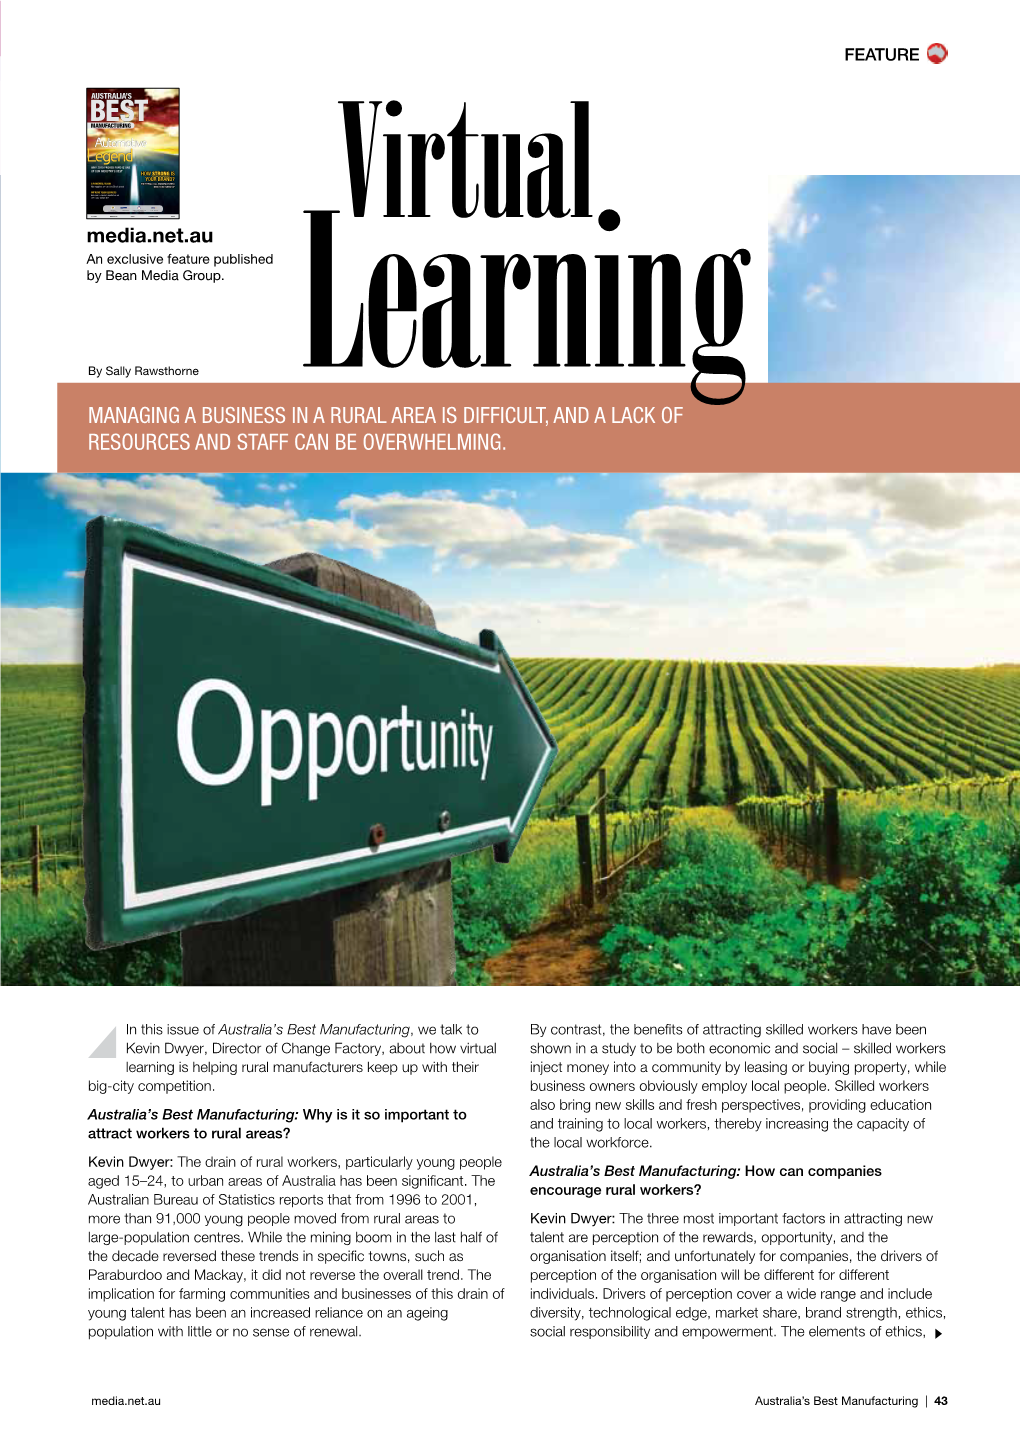 Virtual Learning Capability Is One Way in Which Employers Can Provide Ongoing Training and Support, Thereby Increasing the Attractiveness of a Rural Company